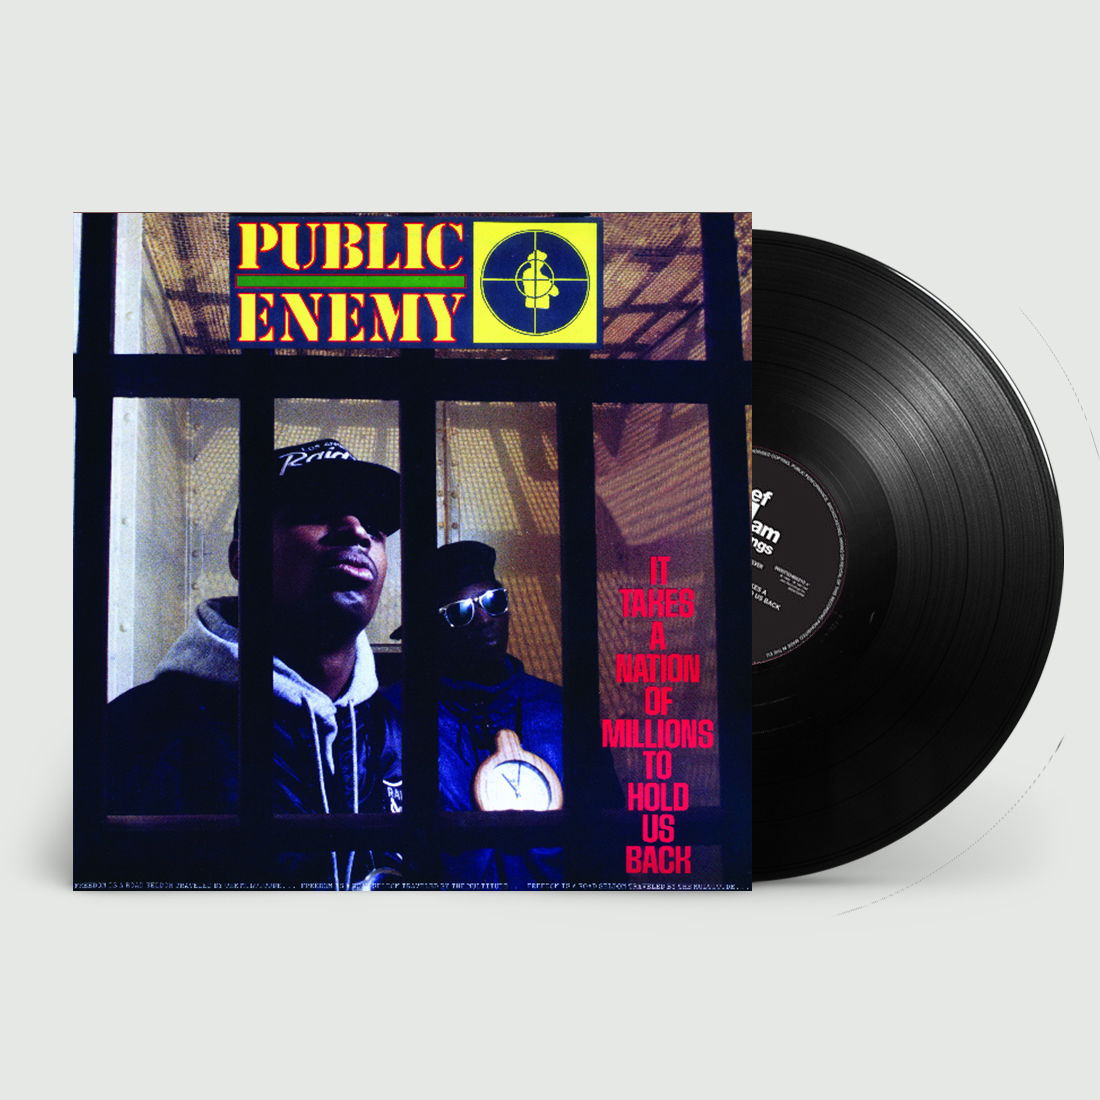 Public Enemy - It Takes A Nation Of Millions To Hold Us Back: Vinyl LP